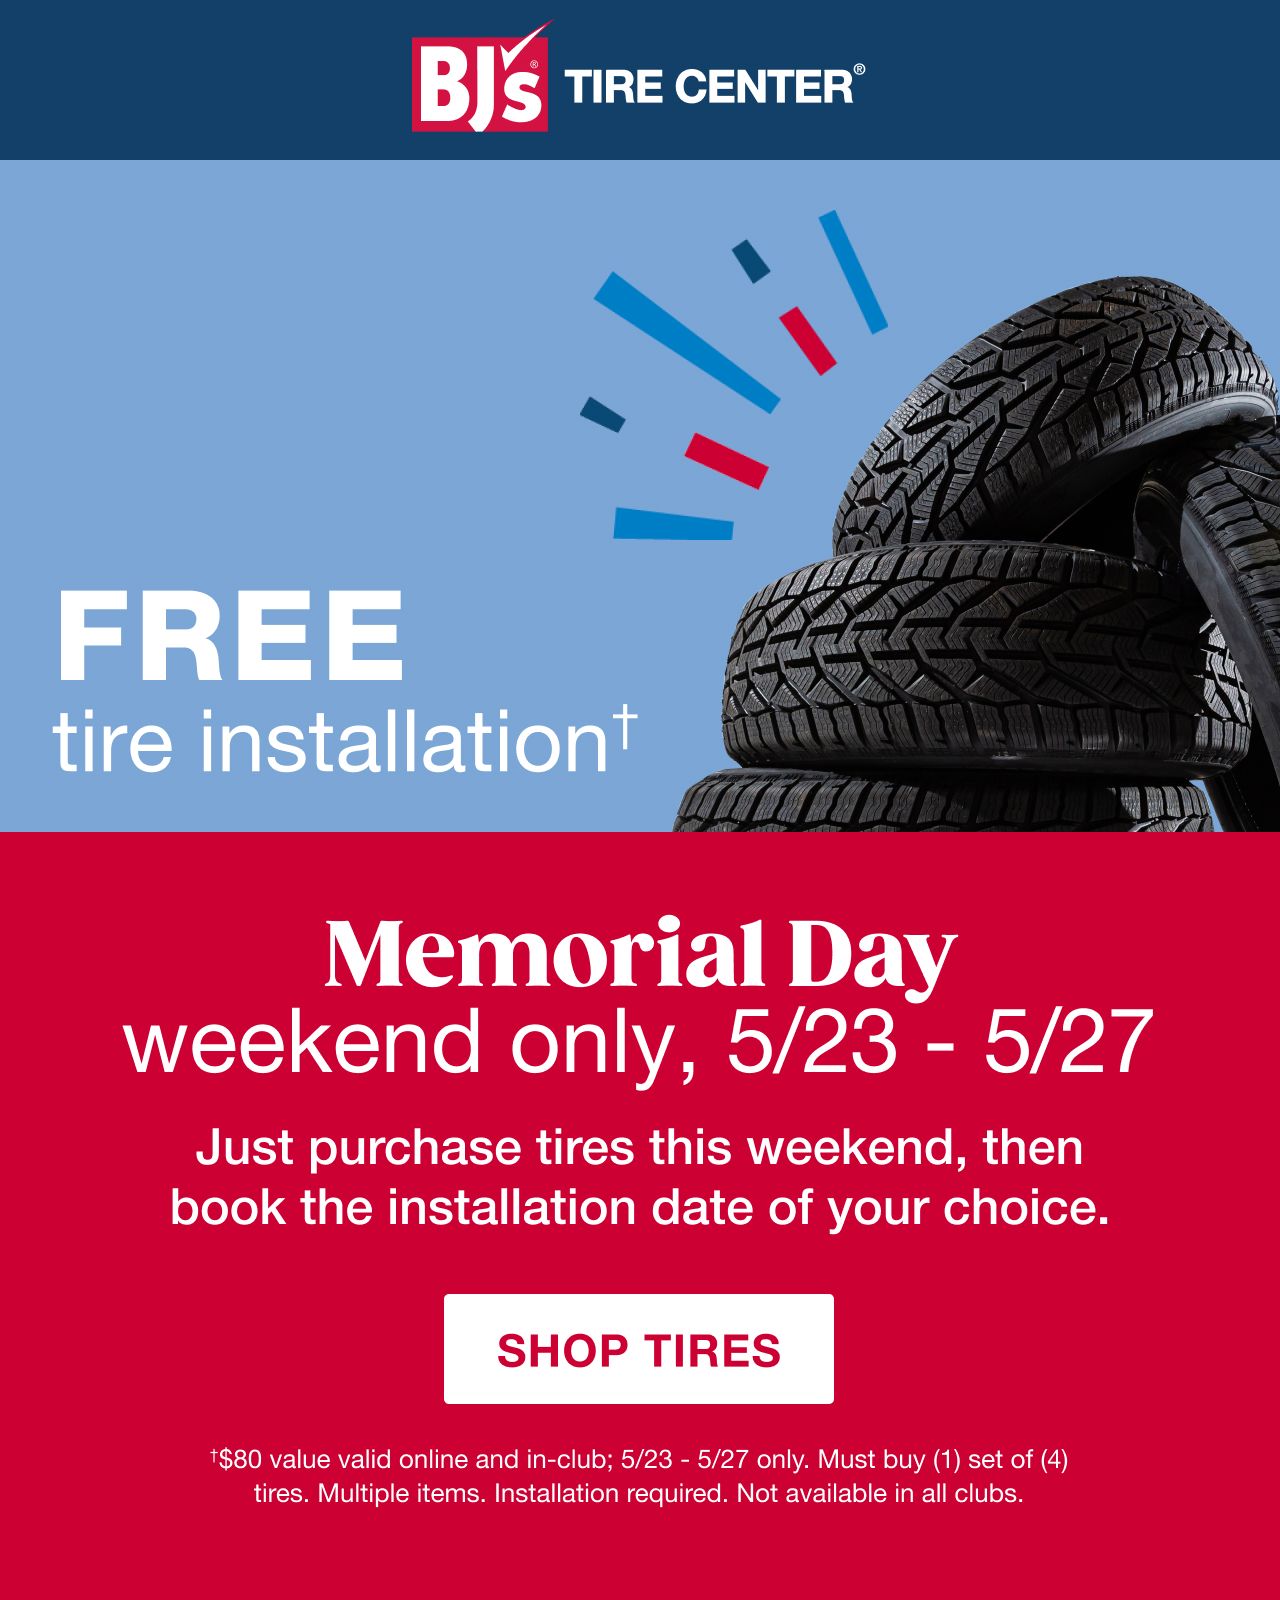 BJs Tire Center. Free Tire Installation†. Memorial Day weekend only, 5/23 - 5/27. Just purchase tires this weekend, then book the installation date of your choice. Click here to shop tires. †$80 value valid online and in-club; 5/23 - 5/27 only. Must buy (1) set of (4) tires. Multiple items. Installation required. Not available in all clubs.